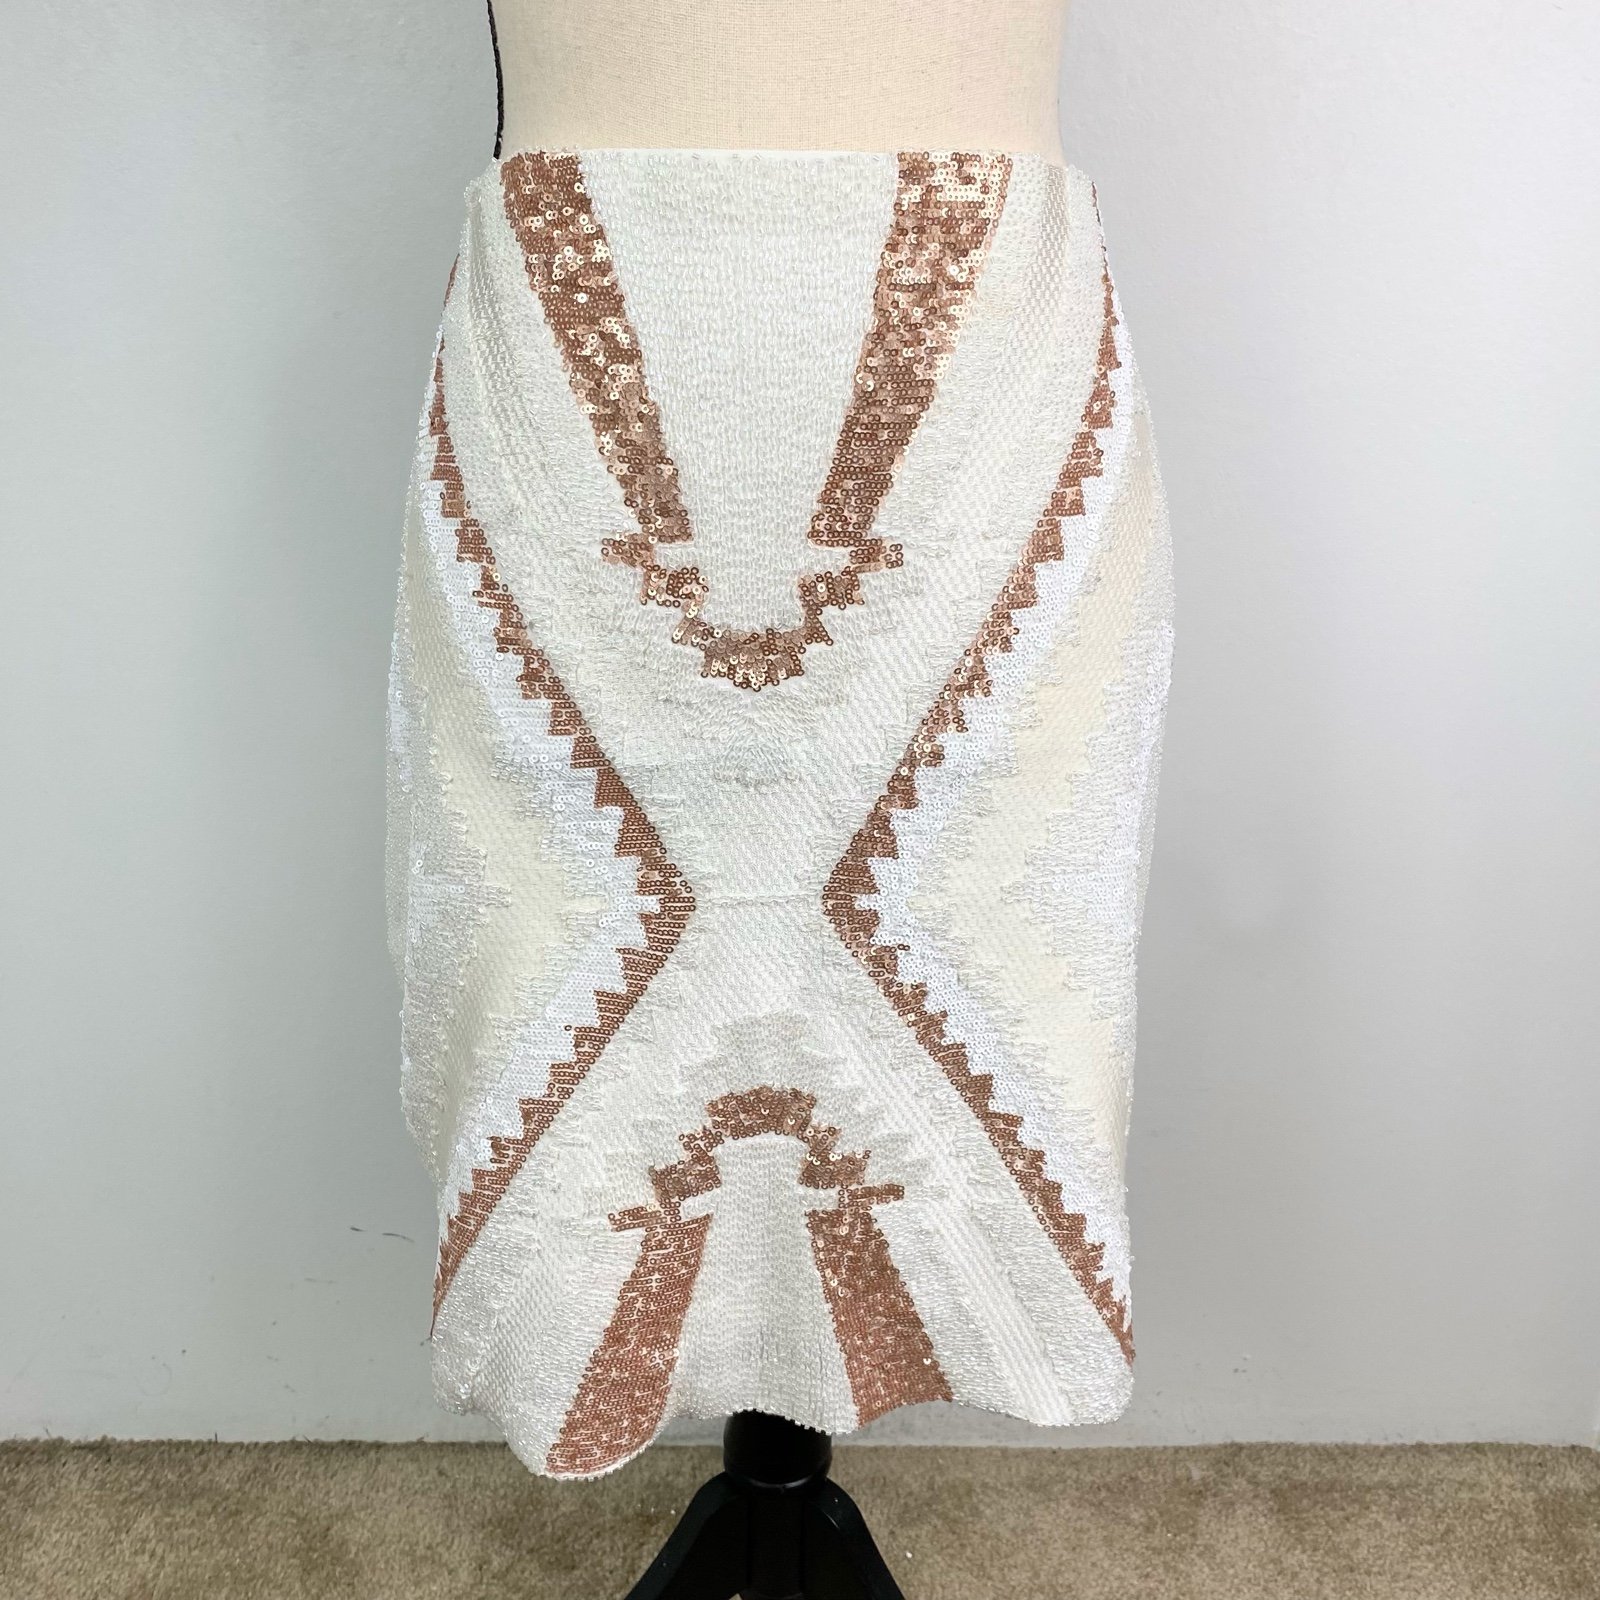 the Lowest price Style Fully Beaded and Sequined Pencil Skirt Sz M NmWOtUxKa Low Price